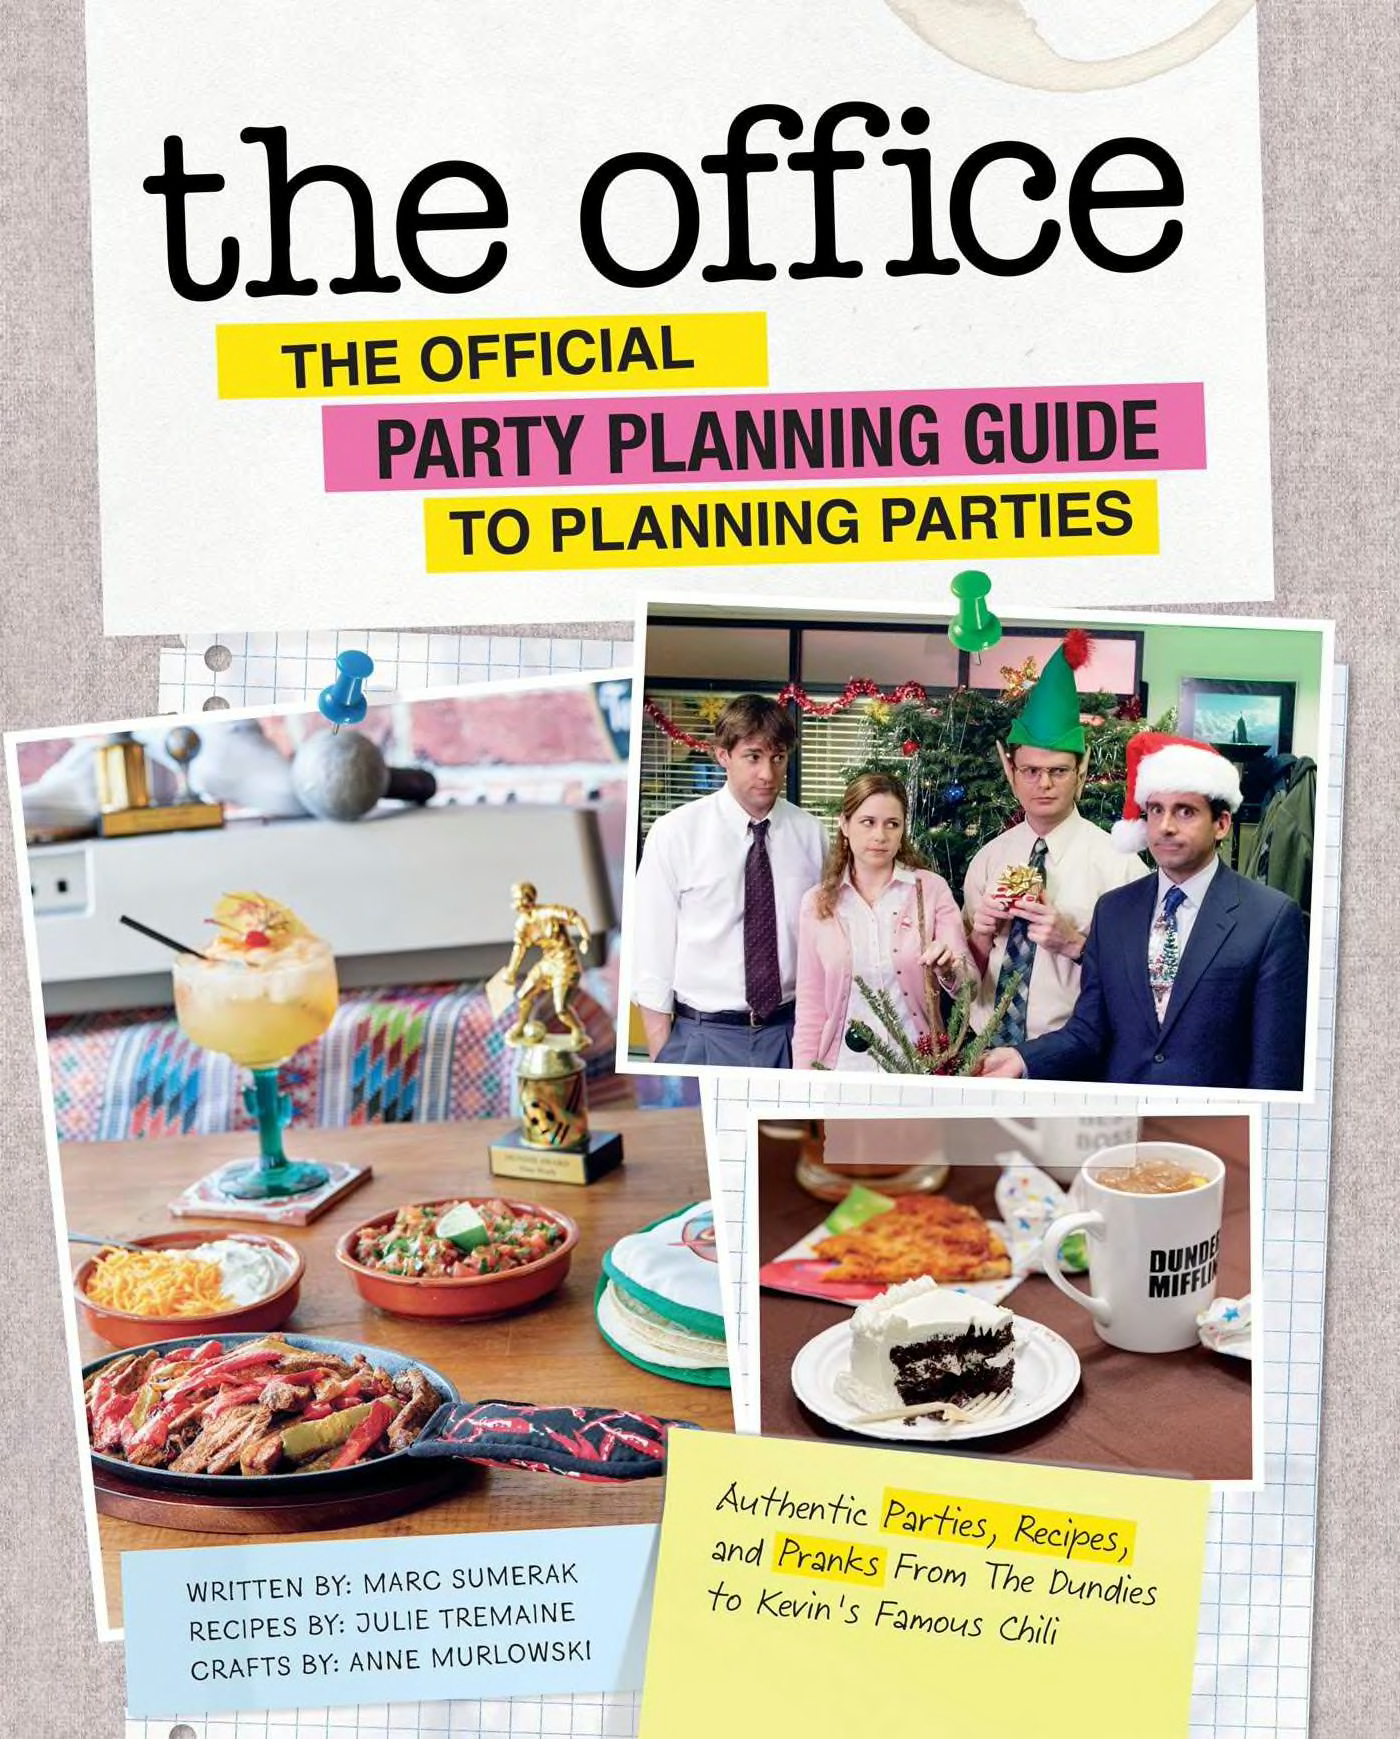 Discover Insight Editions's 'The Office: The Official Party Planning Guide to Planning Parties' by Marc Sumerak, Julie Tremaine, and Anne Murlowski on Amazon.